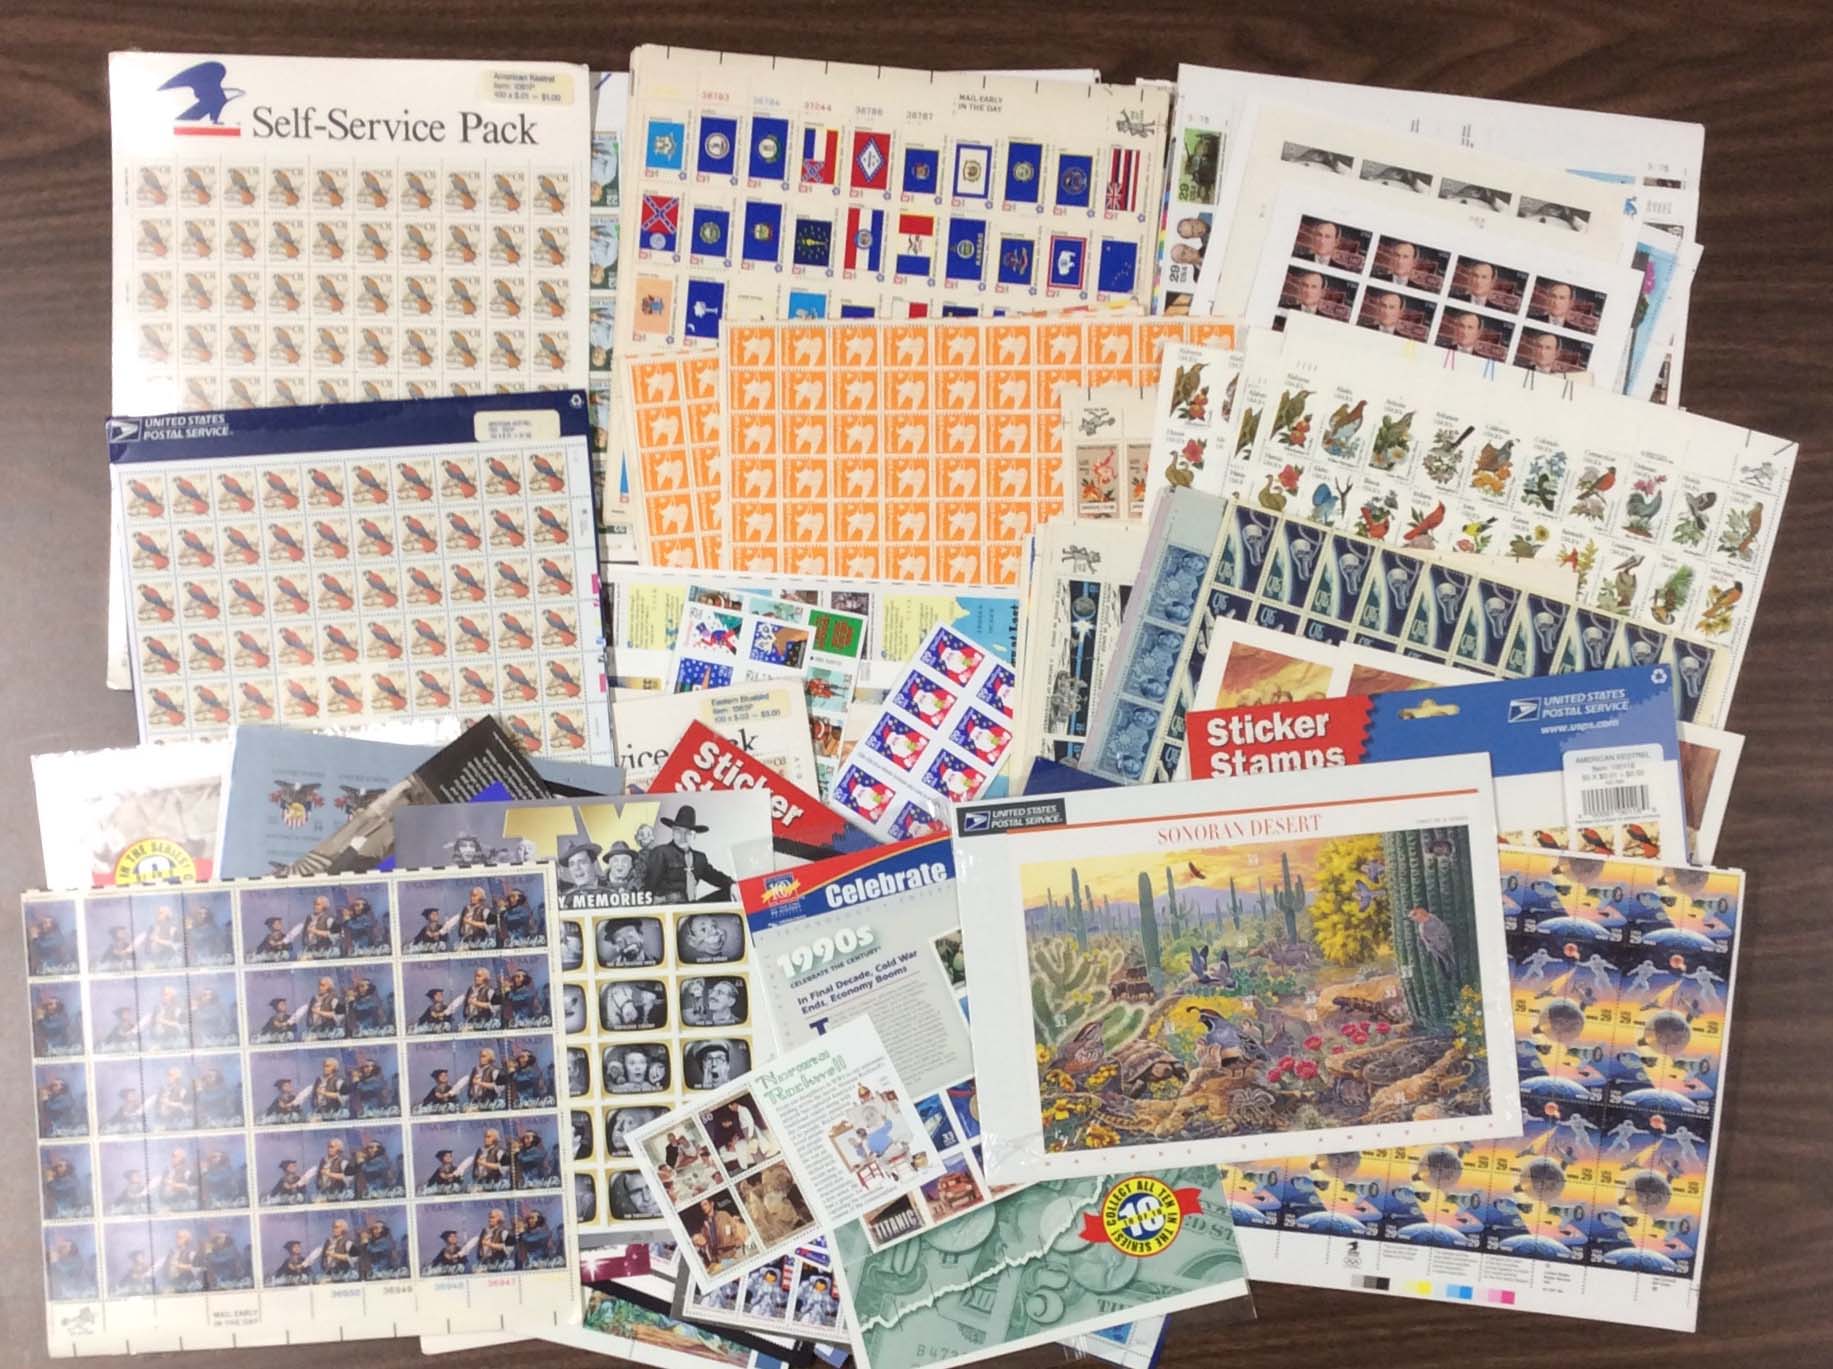 Under First-Class Stamps, Mixed Lot, New Condition ($585.71 Face Value)